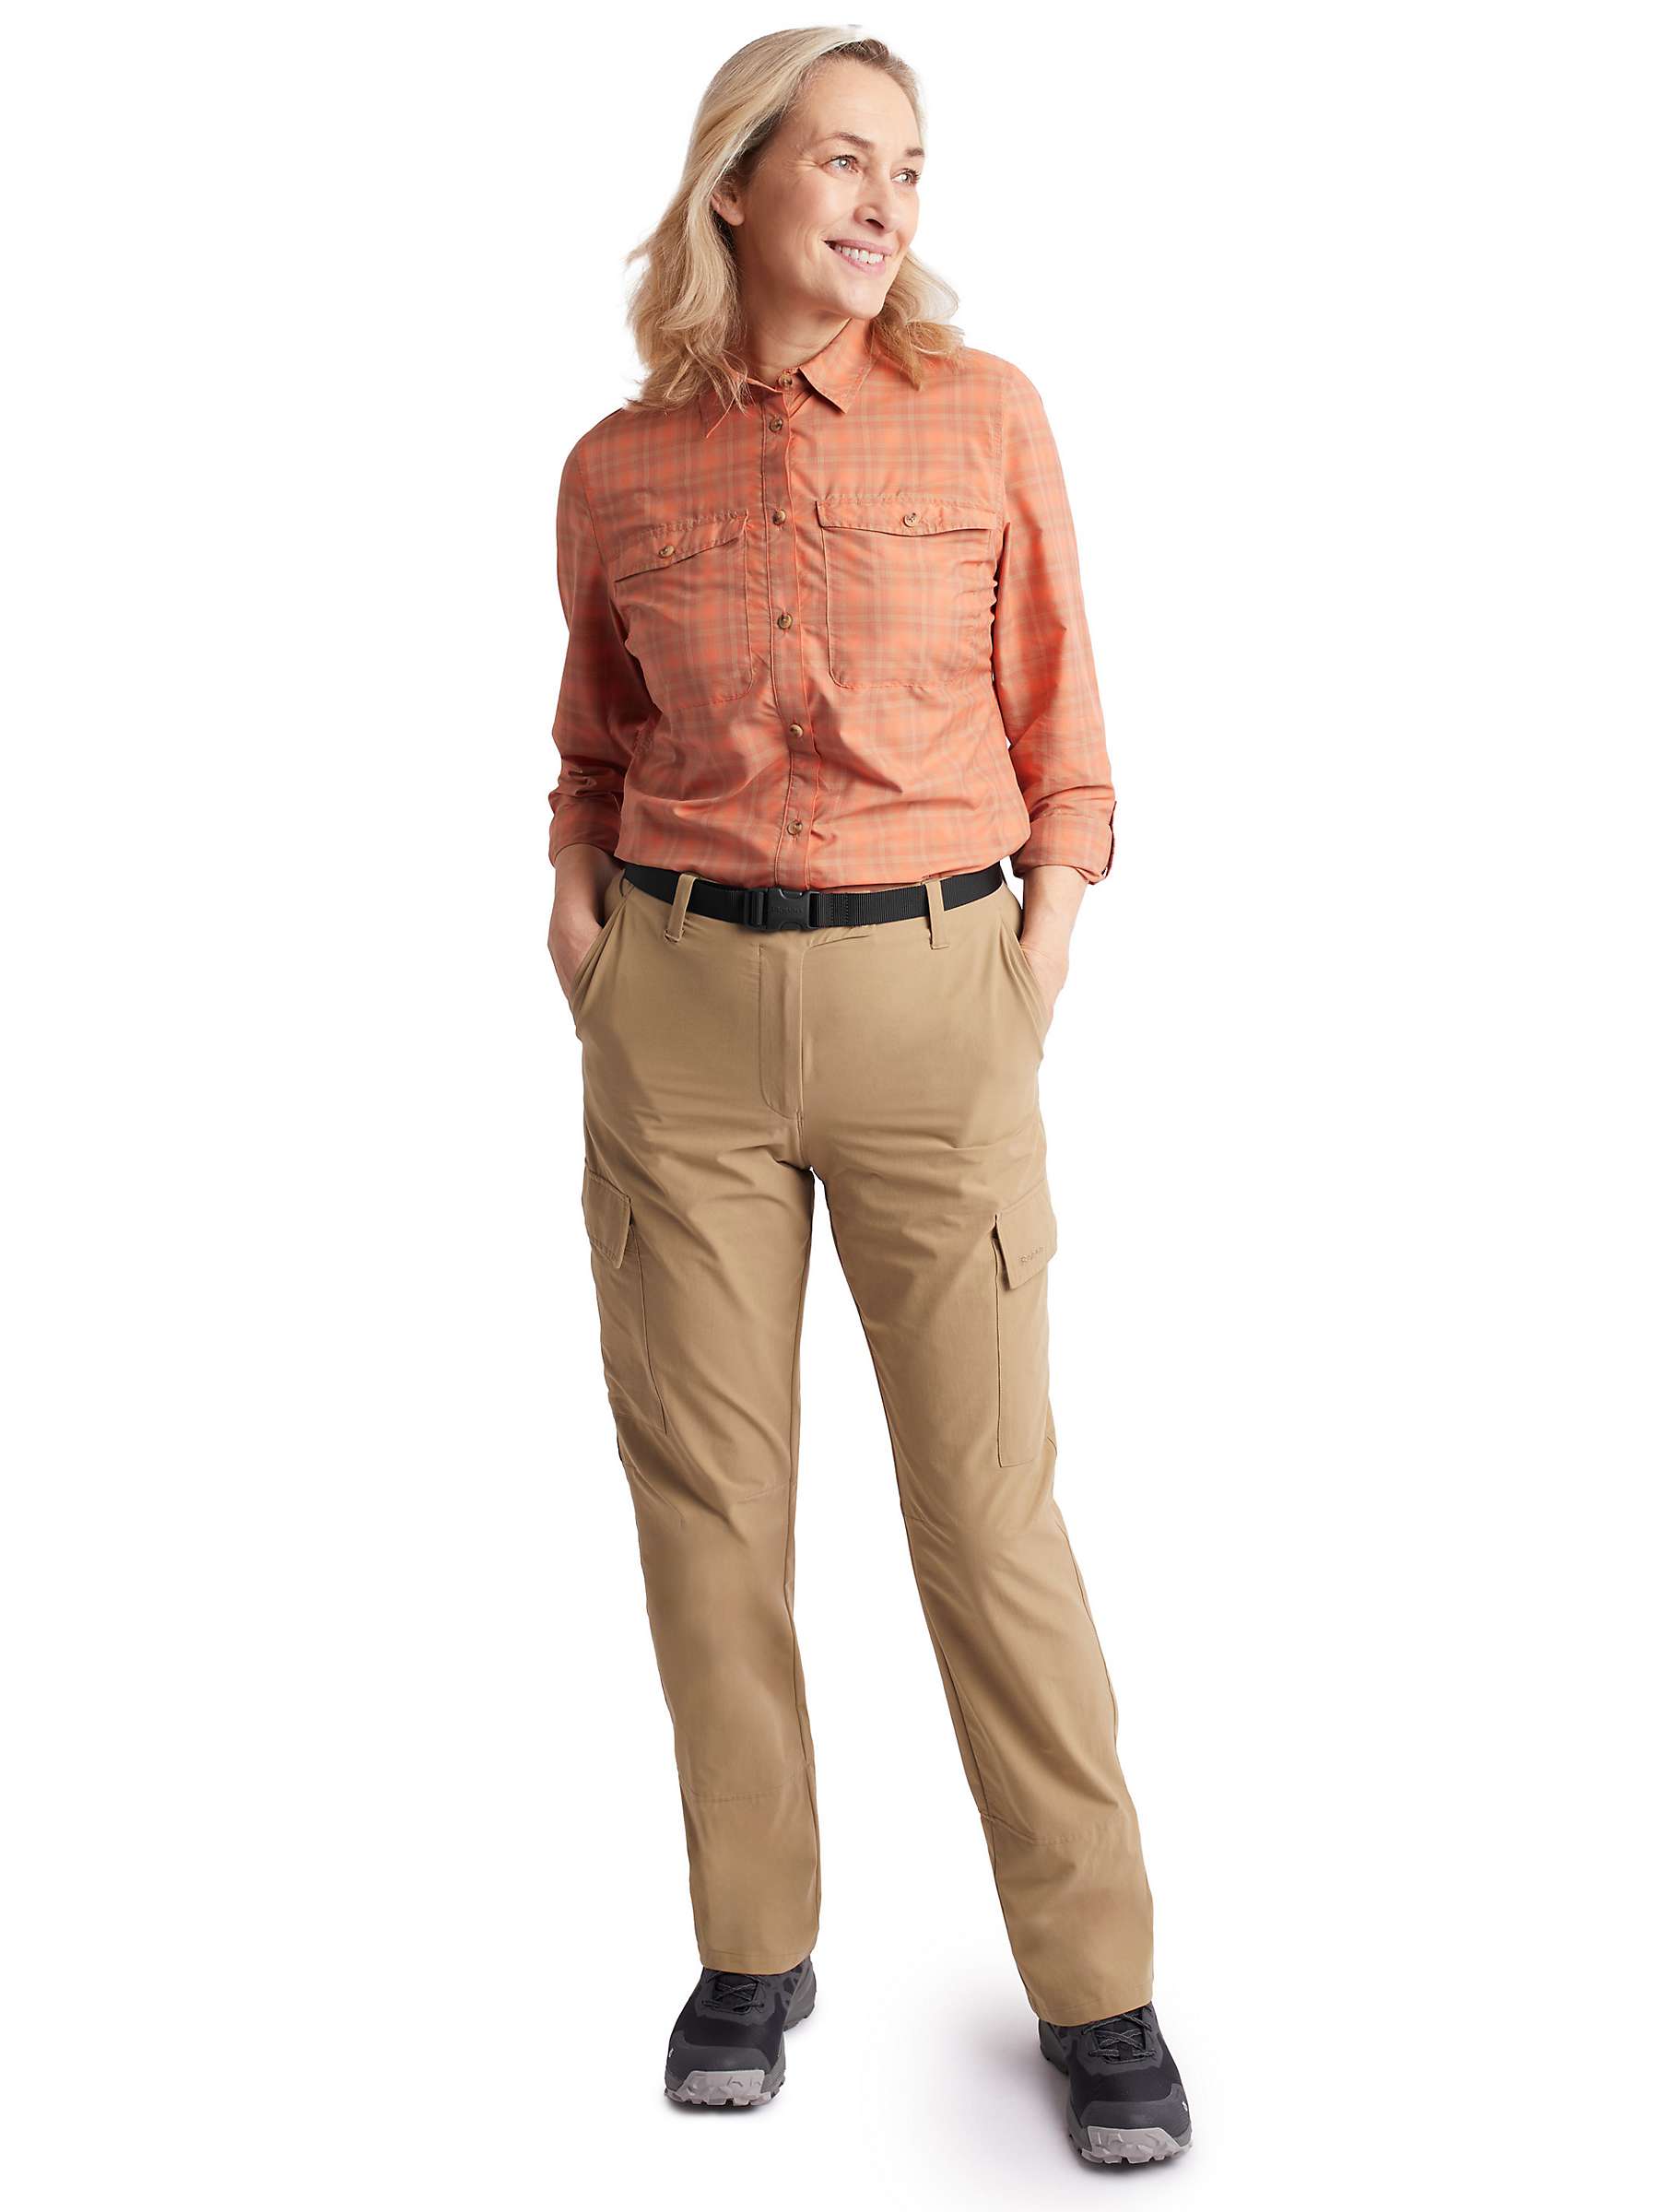 Buy Rohan Savannah Anti-Insect Expedition Trousers Online at johnlewis.com